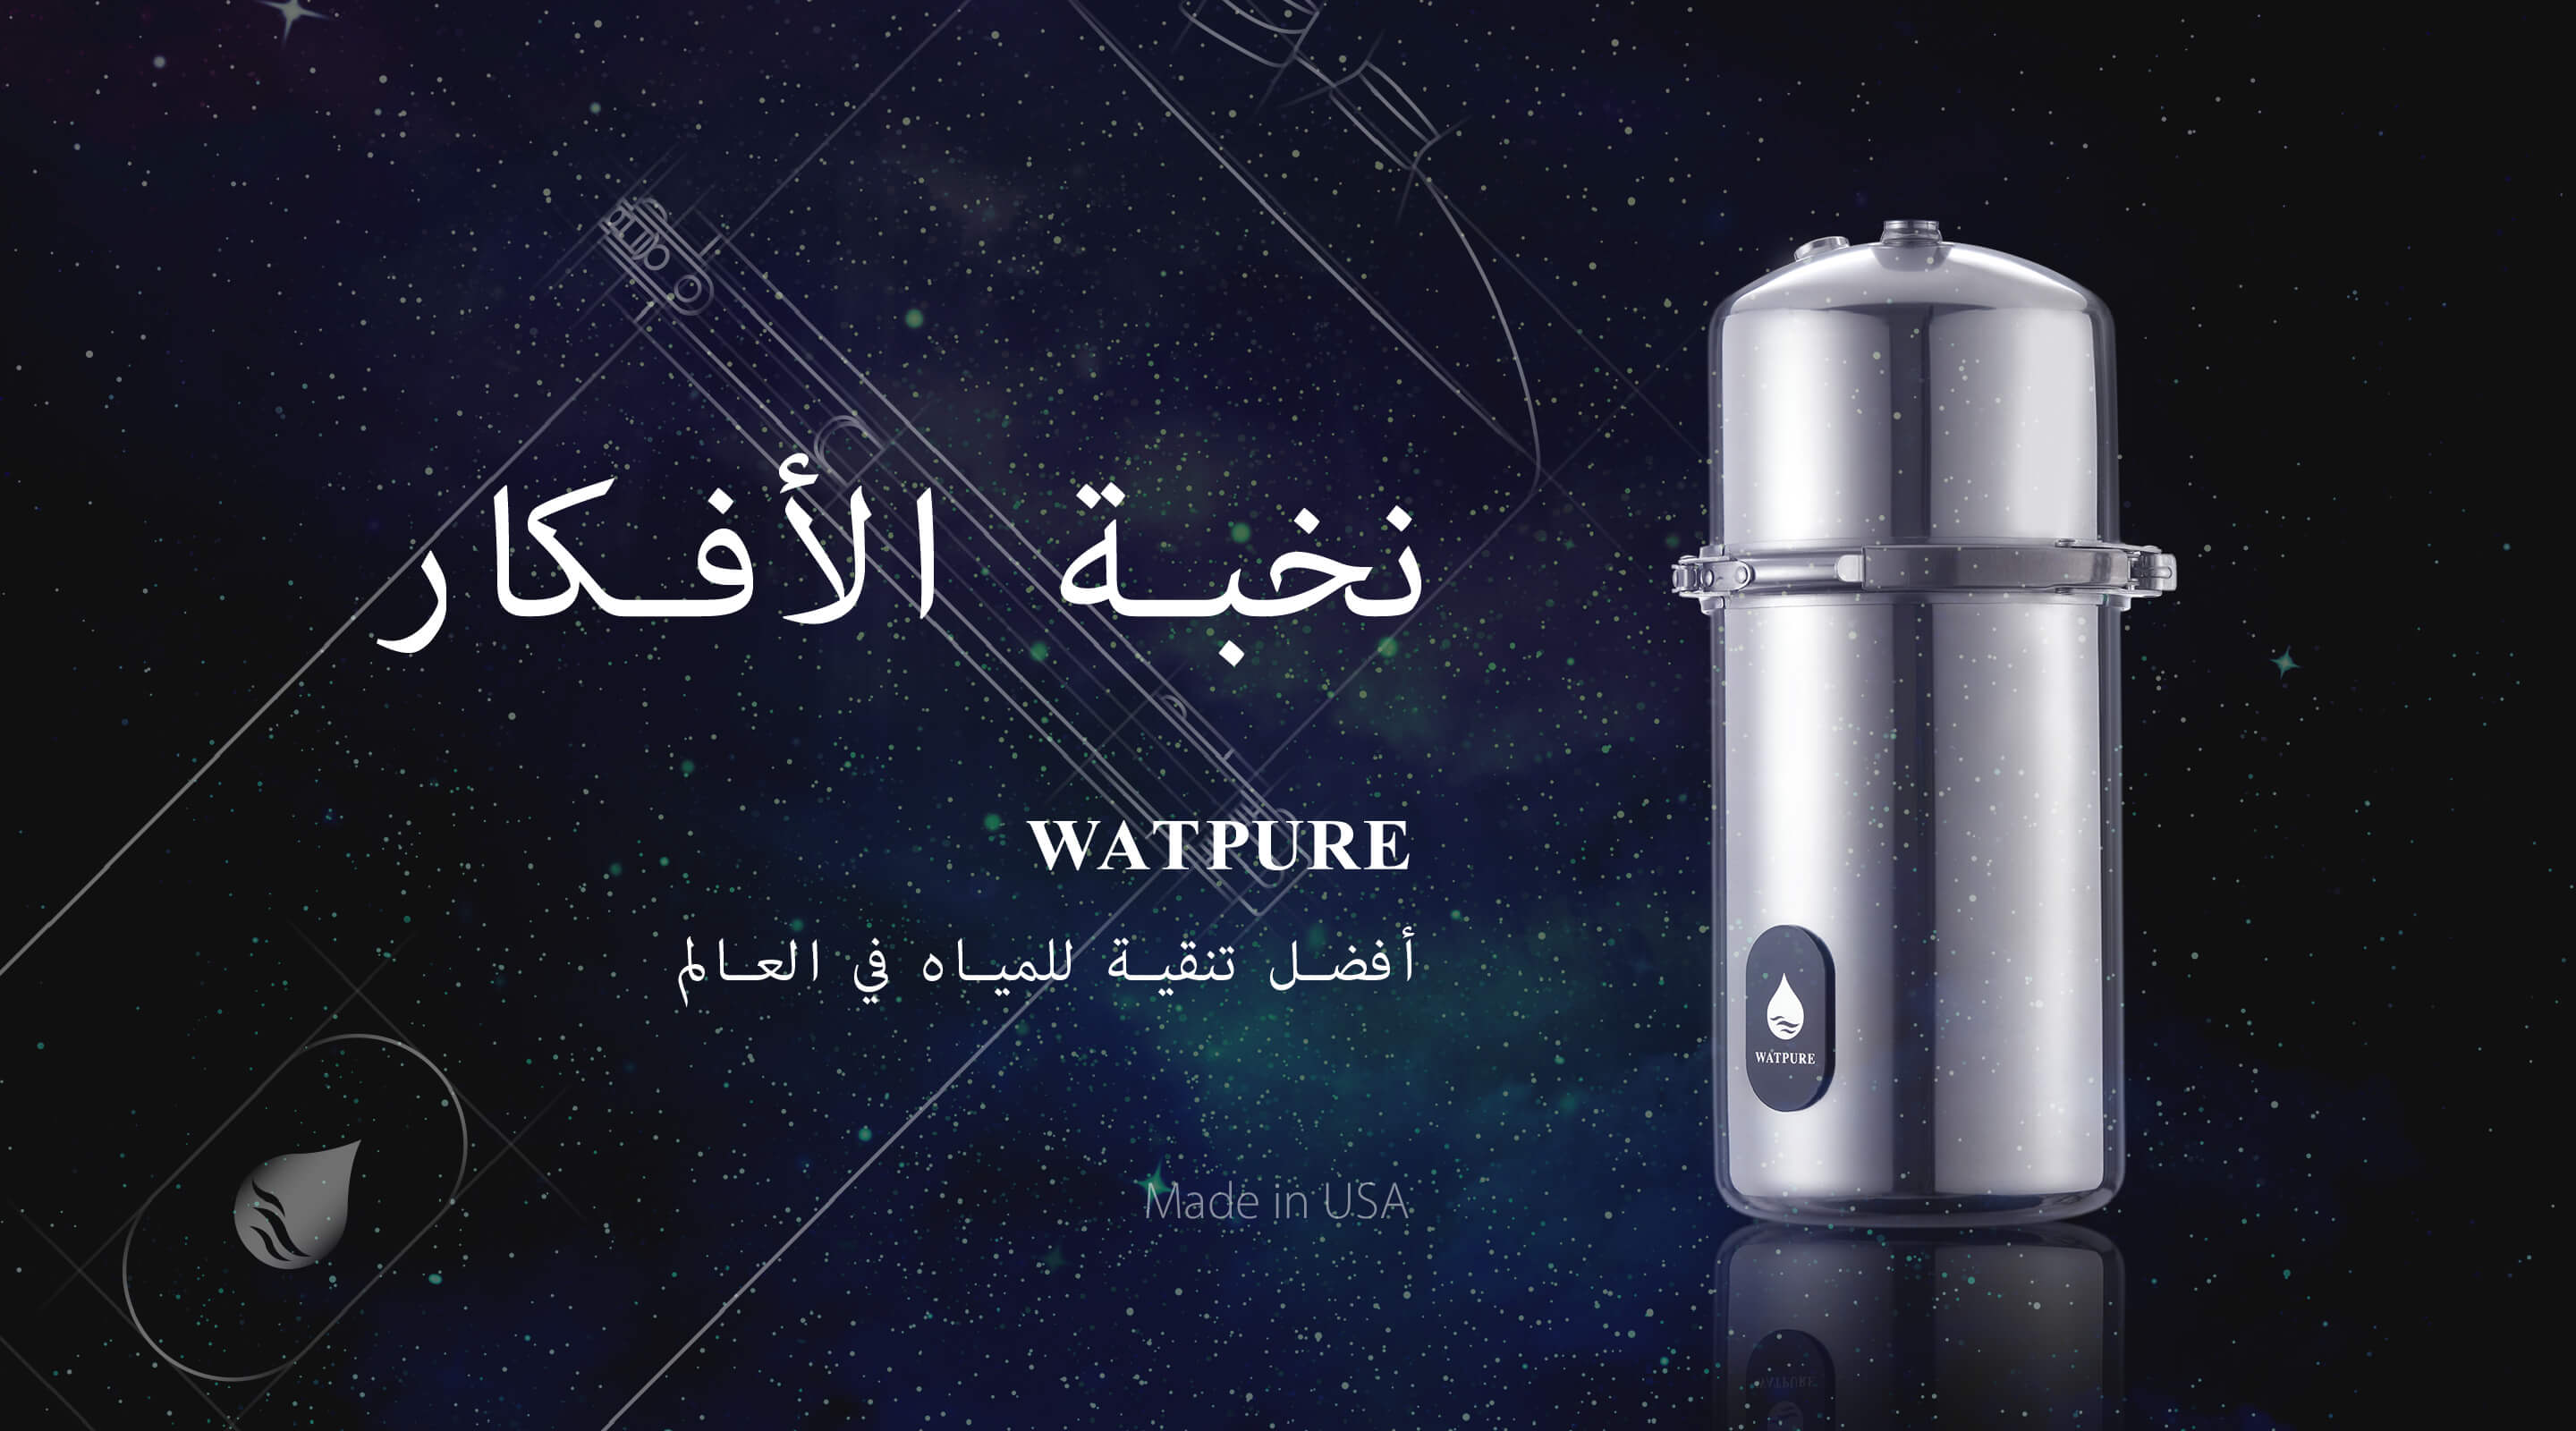 The Intellectual Elite. WATPURE Filtration Systems, W660, Made in USA